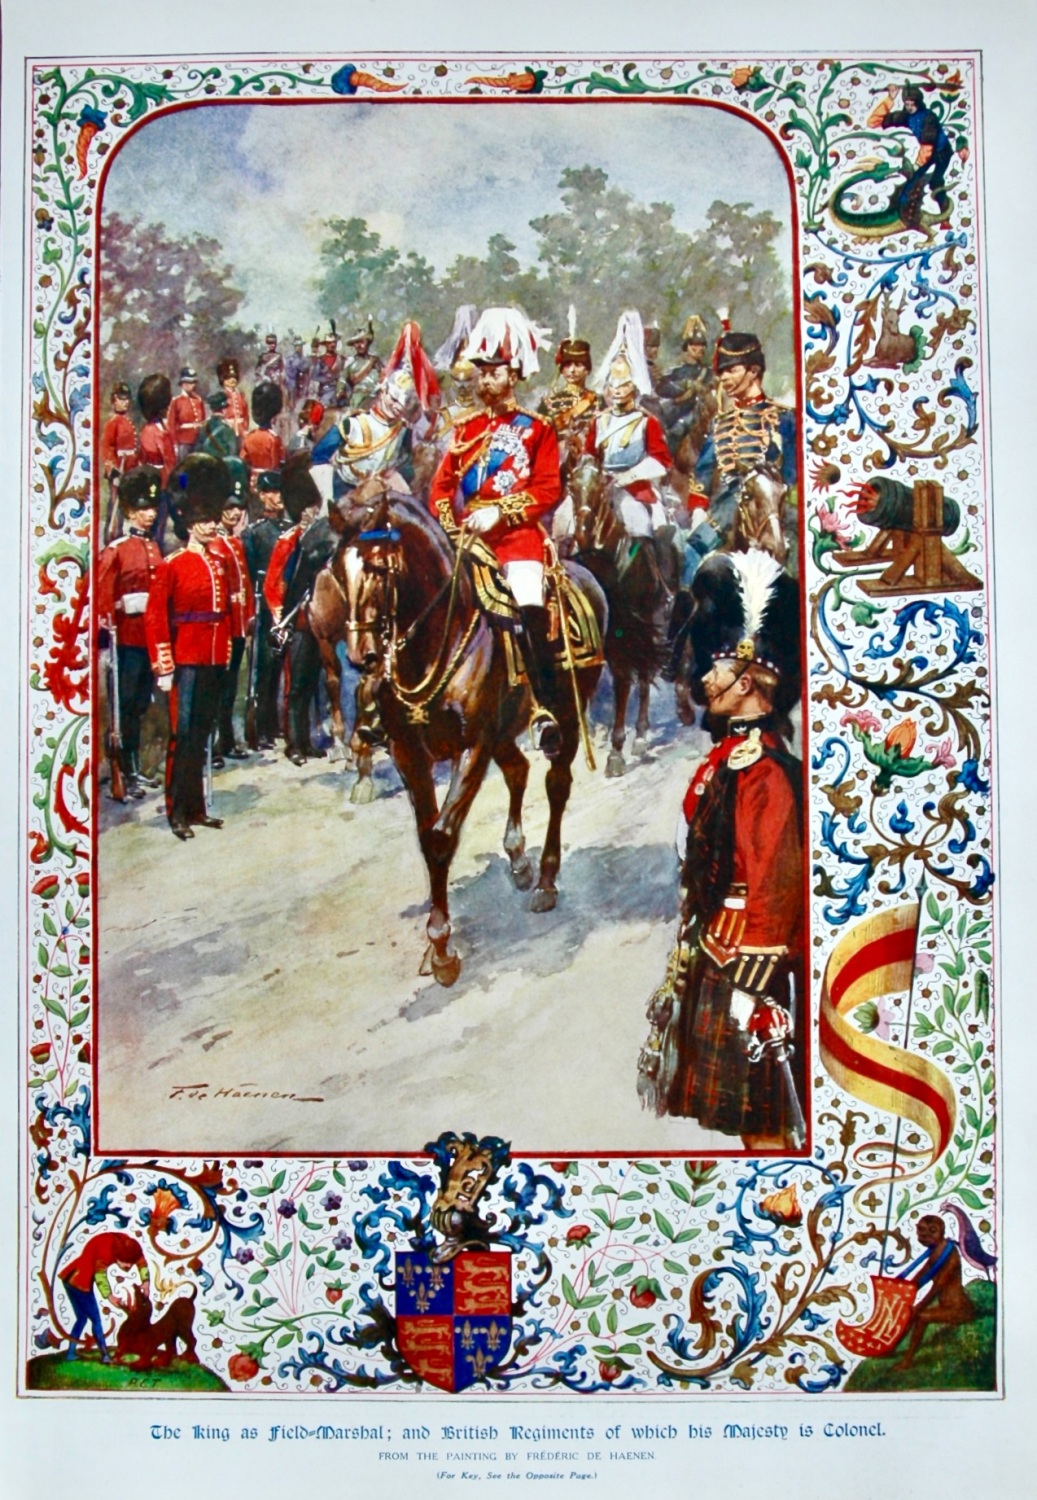 The King as Field-Marshal ; and British Regiments of which his Majesty is C